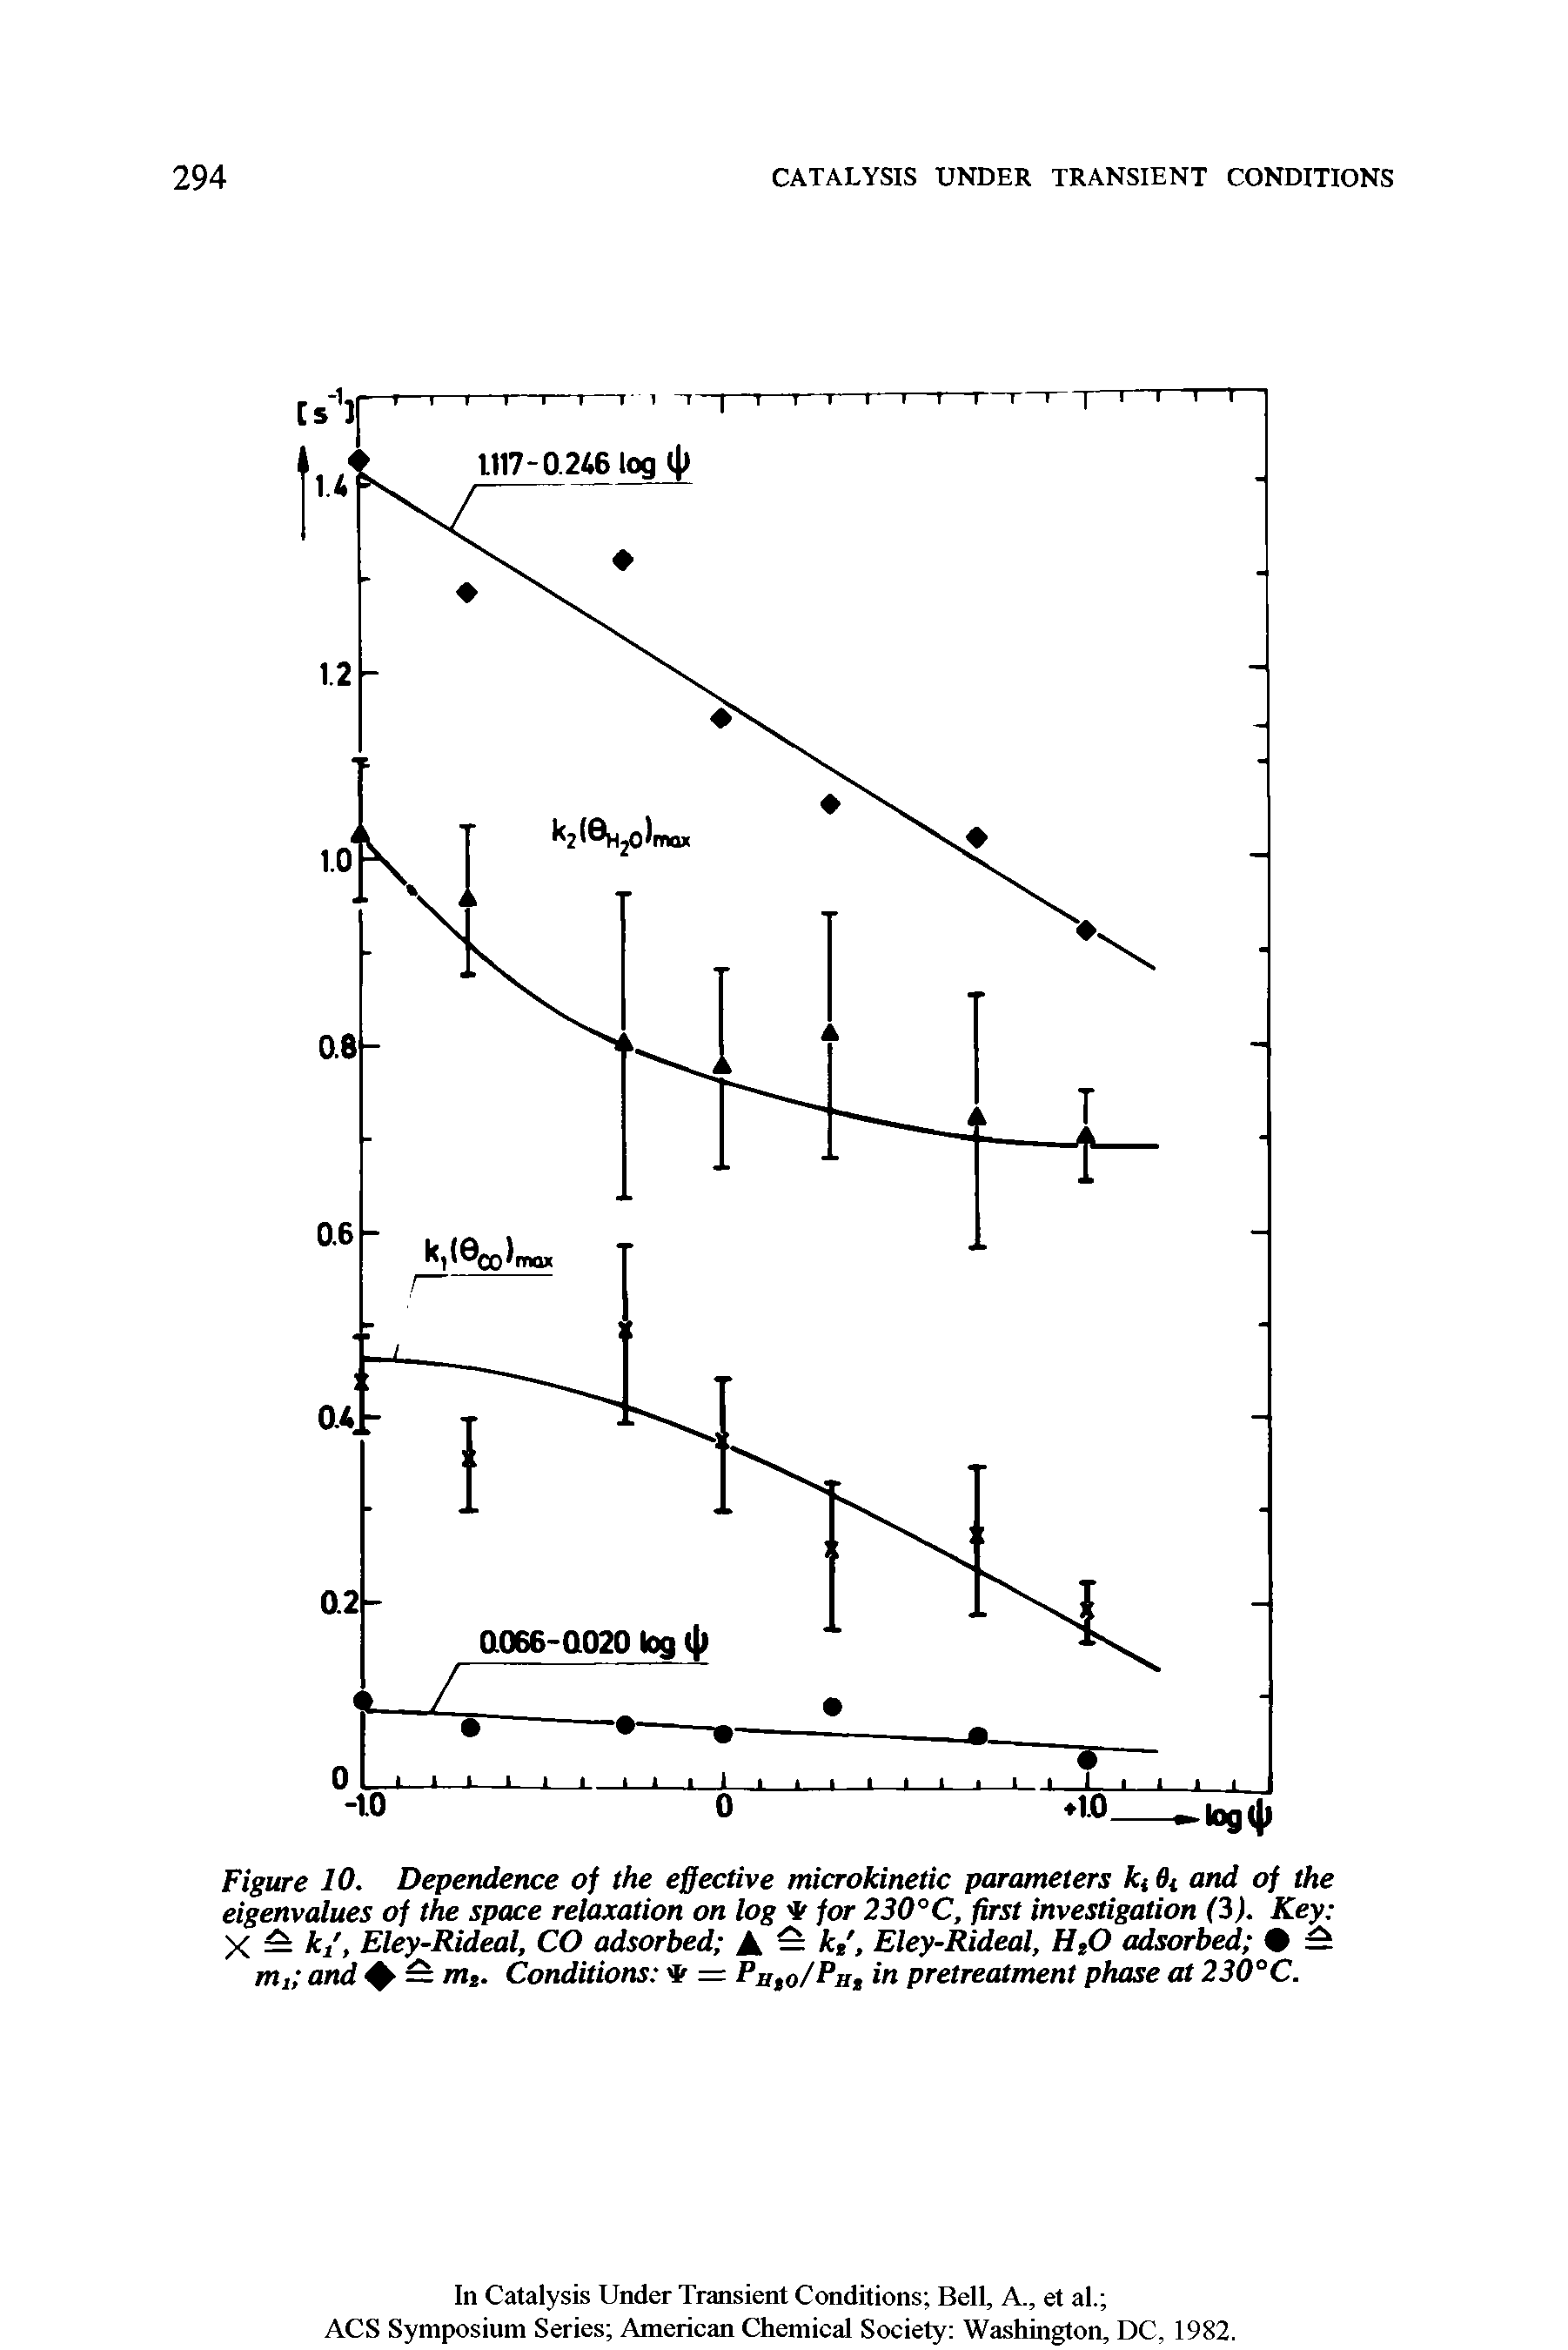 Figure 10. Dependence of the effective microkinetic parameters k( 8t and of the eigenvalues of the space relaxation on log for 230°C, first investigation (3). Key X — k/, Eley-Rideal, CO adsorbed A — k/, Eley-Rideal, HsO adsorbed m, and + — mt. Conditions = Puto/Pnt in pretreatment phase at 230°C.